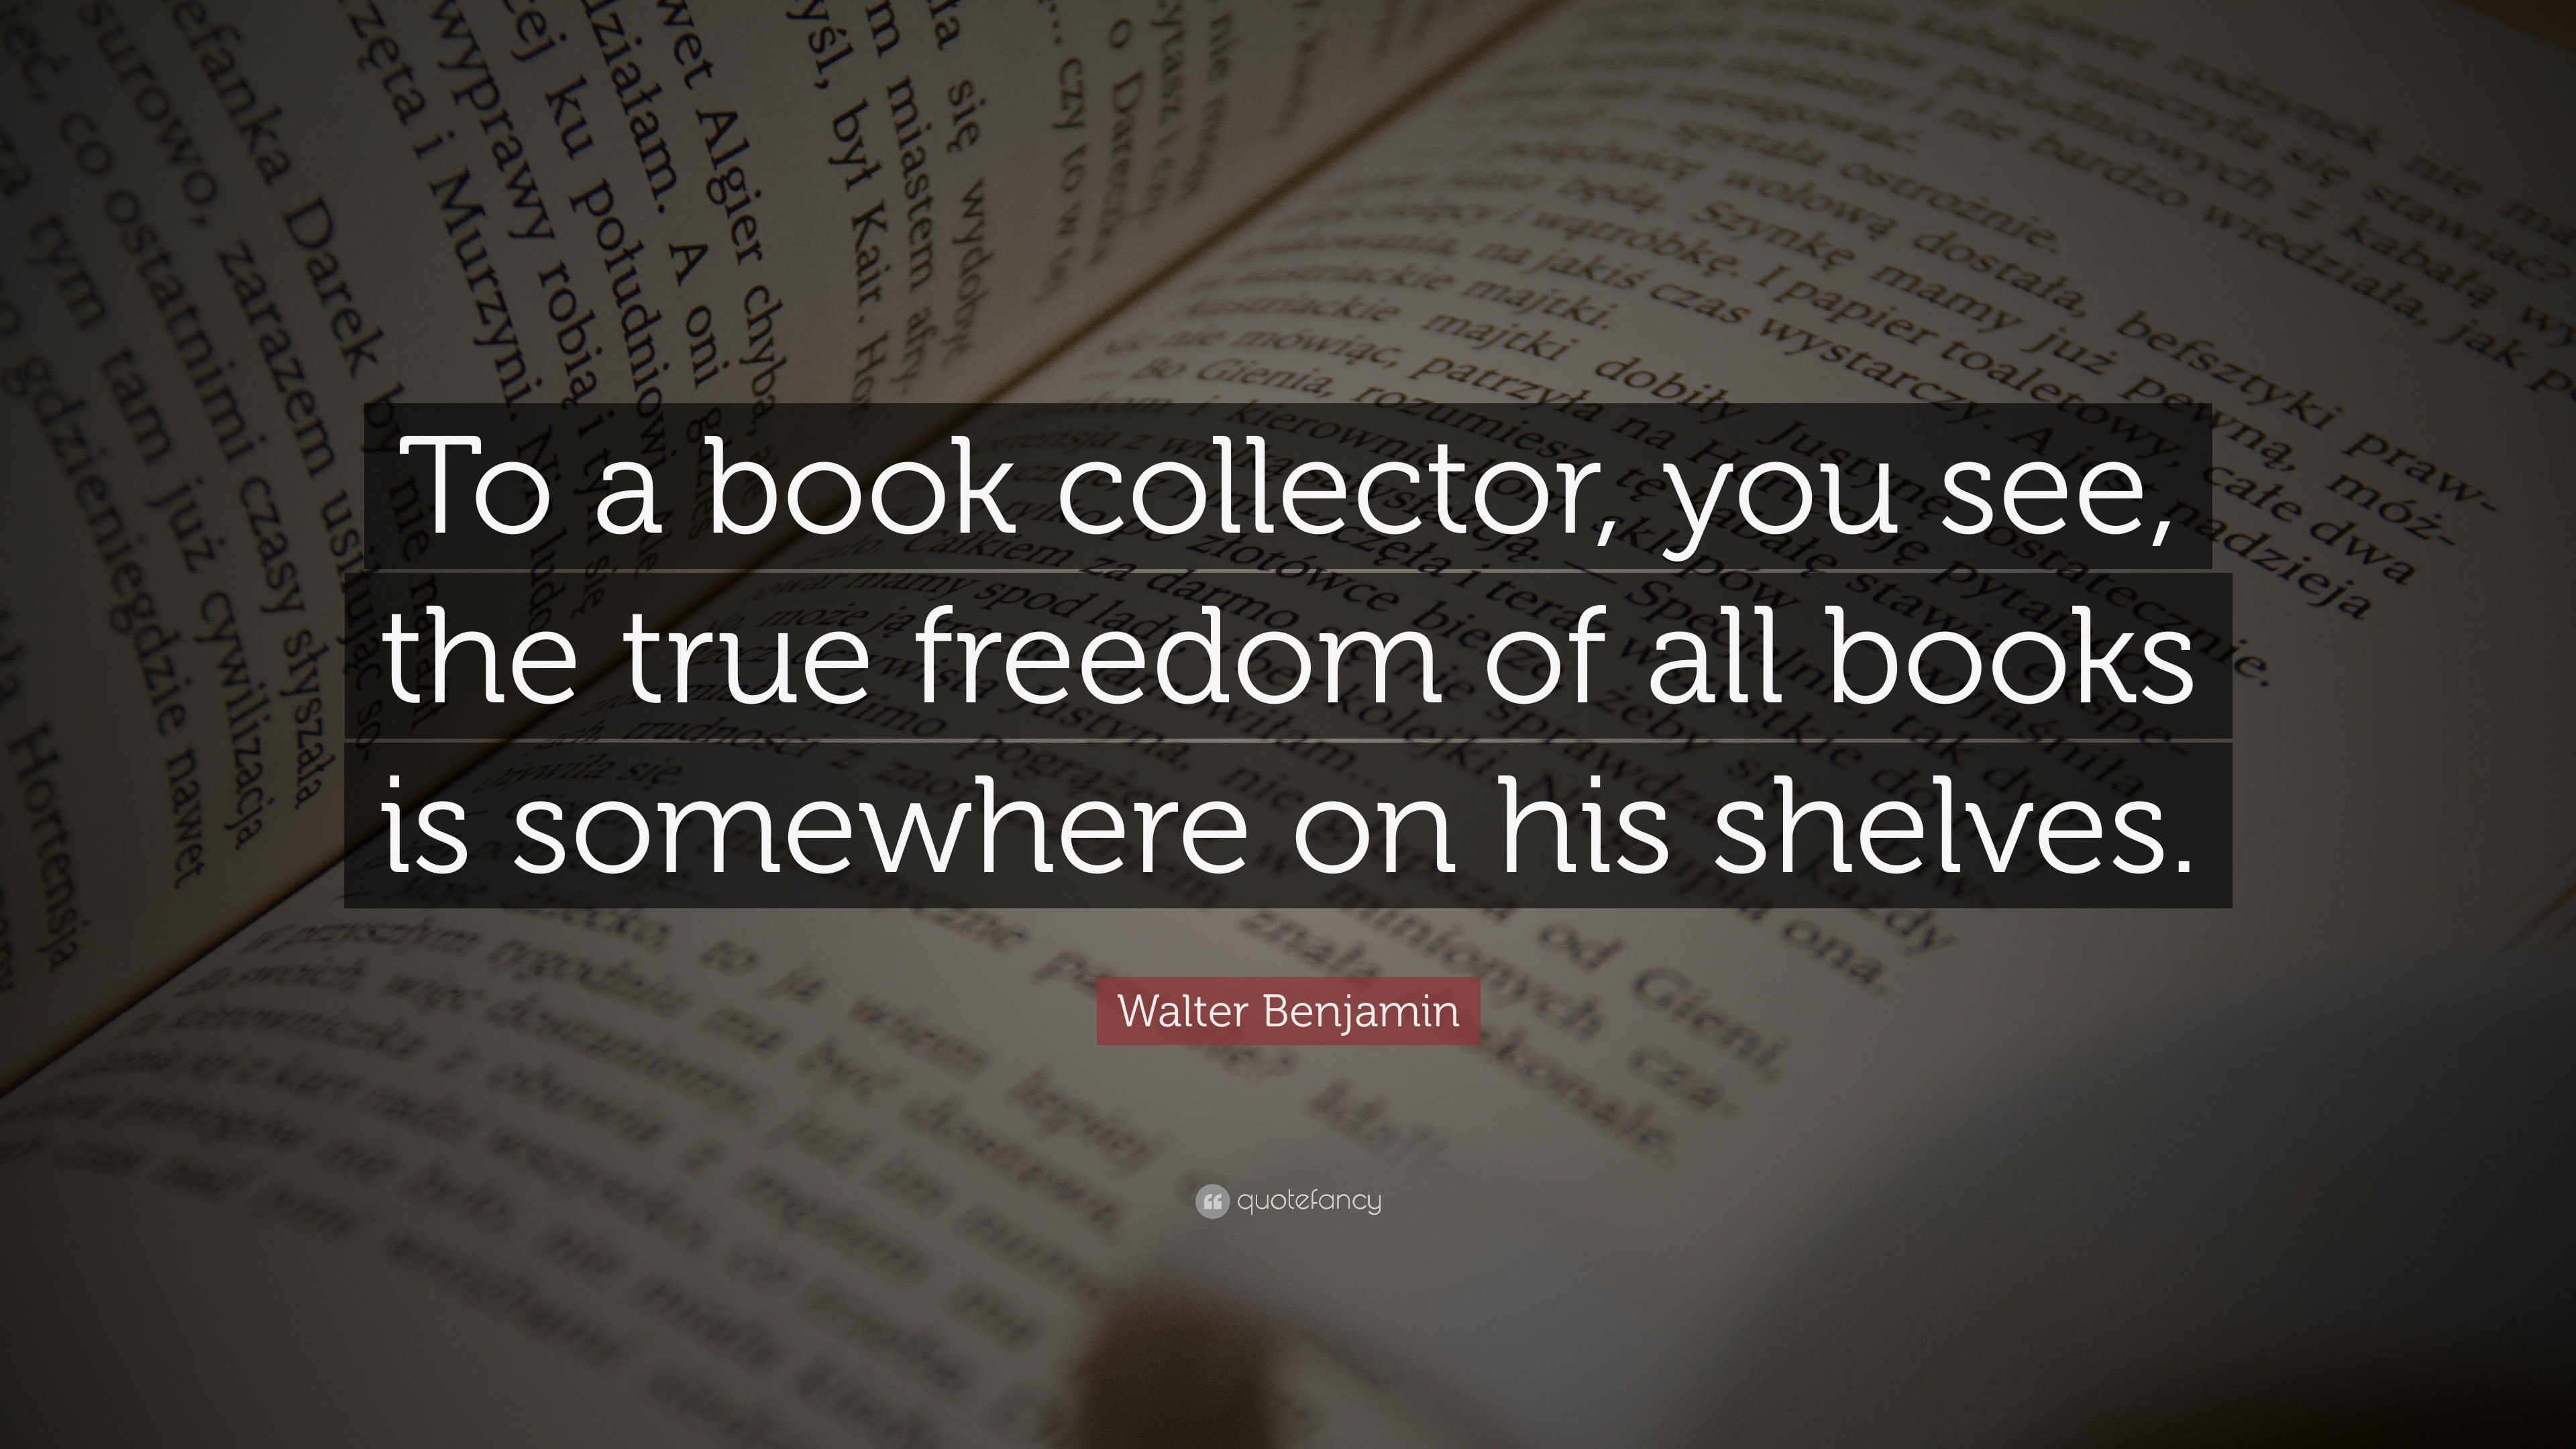 Walter Benjamin Quote: “To a book collector, you see, the true freedom ...